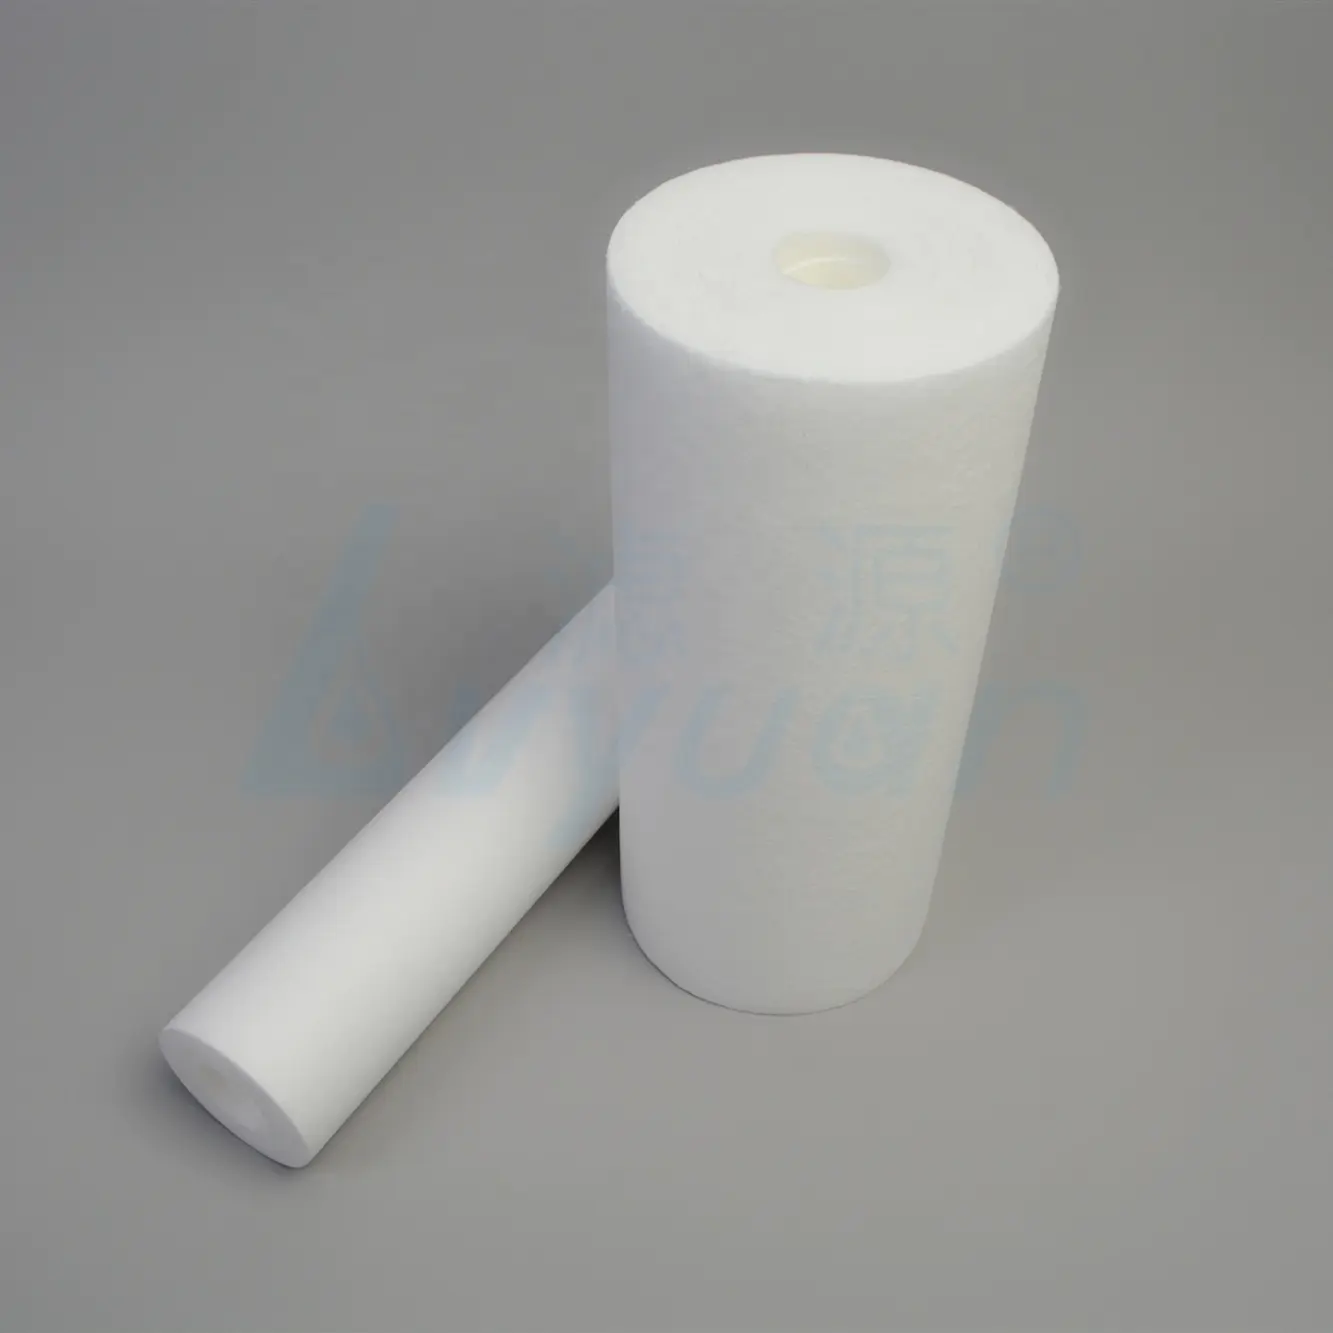 PP Melt Blown Filter Cartridge Customized Size Sediment Water Filter with 1 3 5 10 20 15 50 75 100 Micron